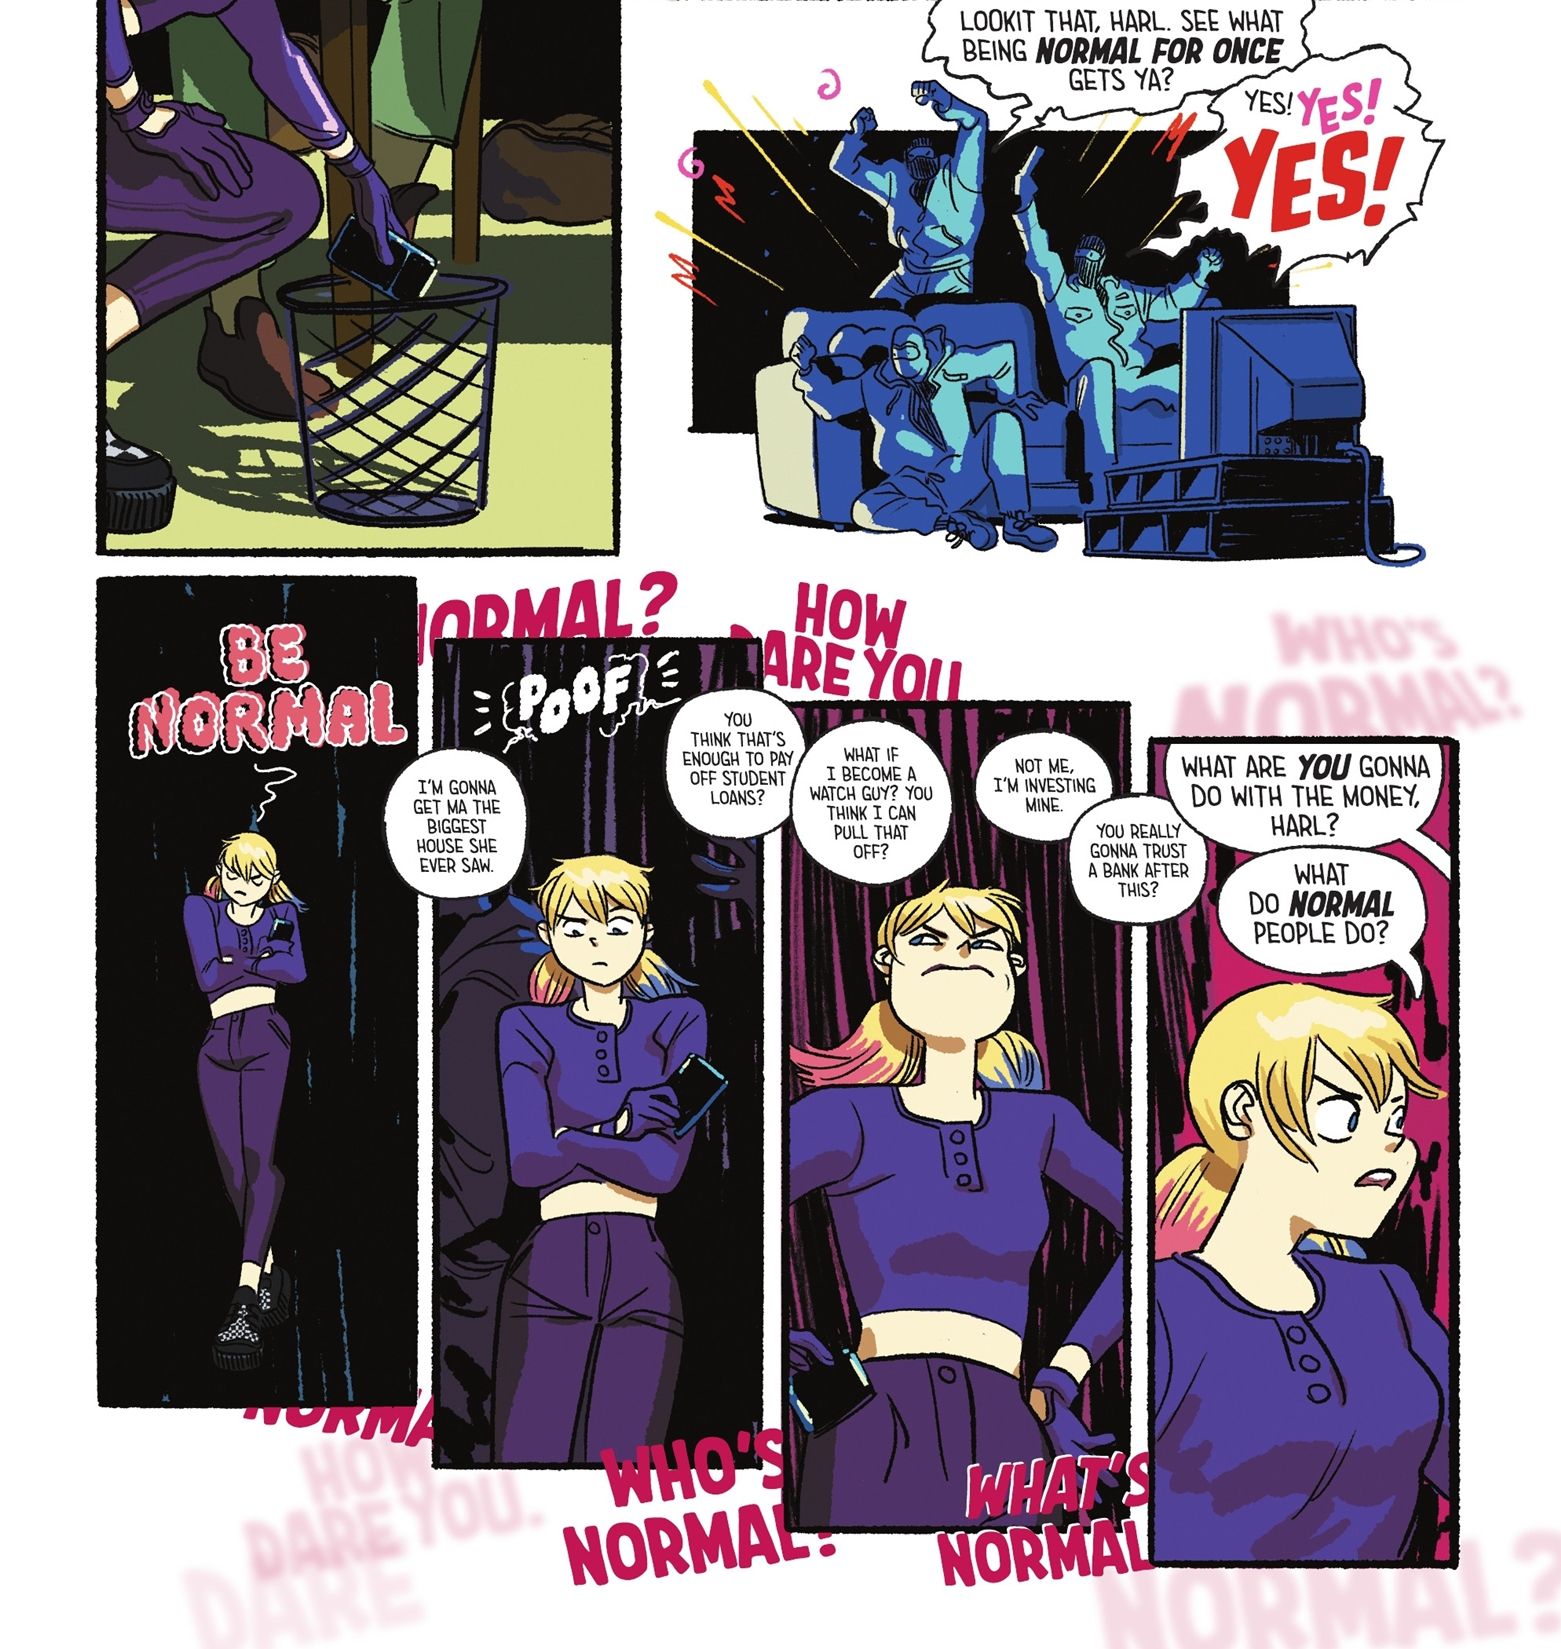 Harley Quinn is shown in a purple shirt, getting increasingly distressed as she tries to decide what 